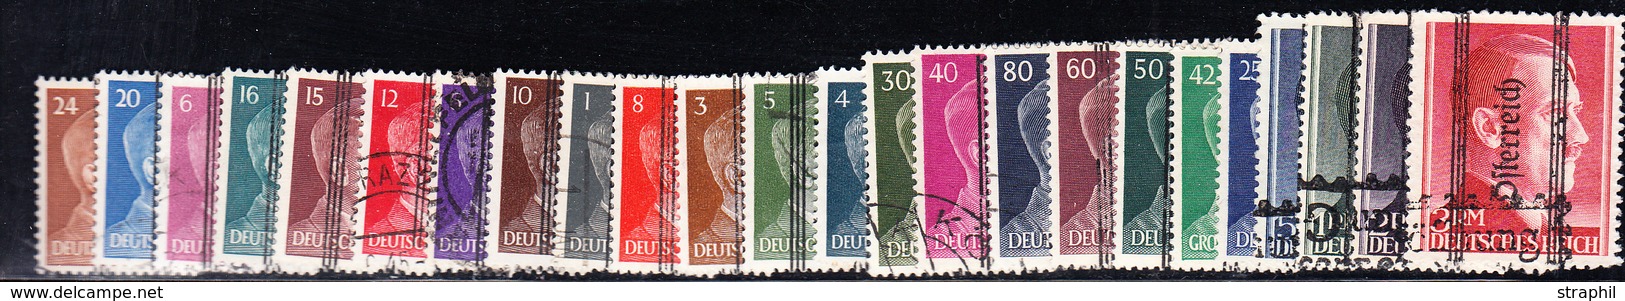 O N°553/75 - Série Hitler - Surch. "Östereich"  -TB - Used Stamps